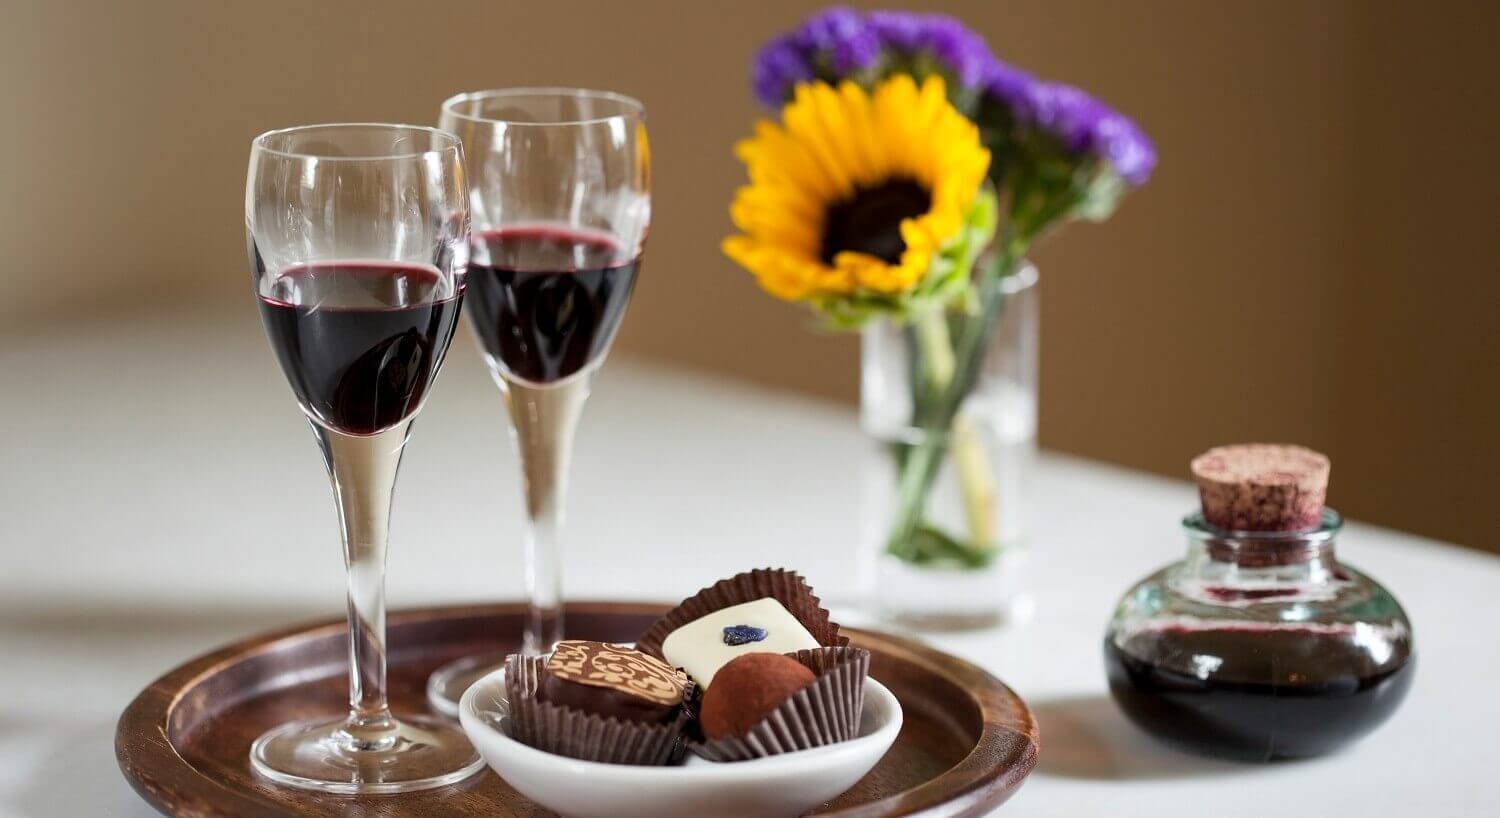 Wooden plate with two glasses of red wine and three chocolate truffles